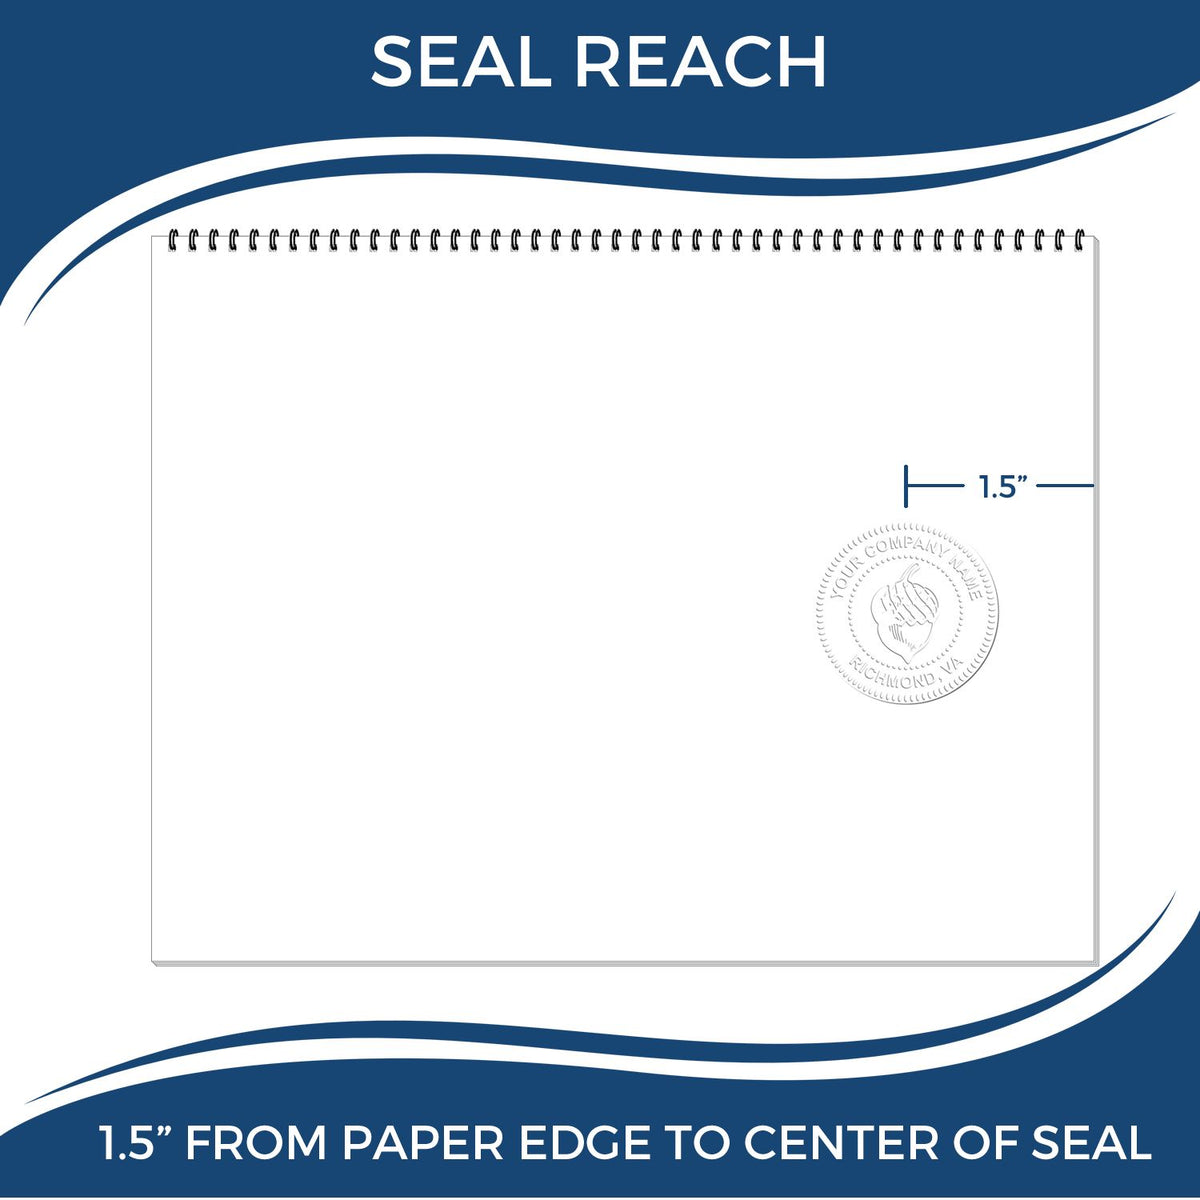 An infographic showing the seal reach which is represented by a ruler and a miniature seal image of the Gift Pennsylvania Engineer Seal